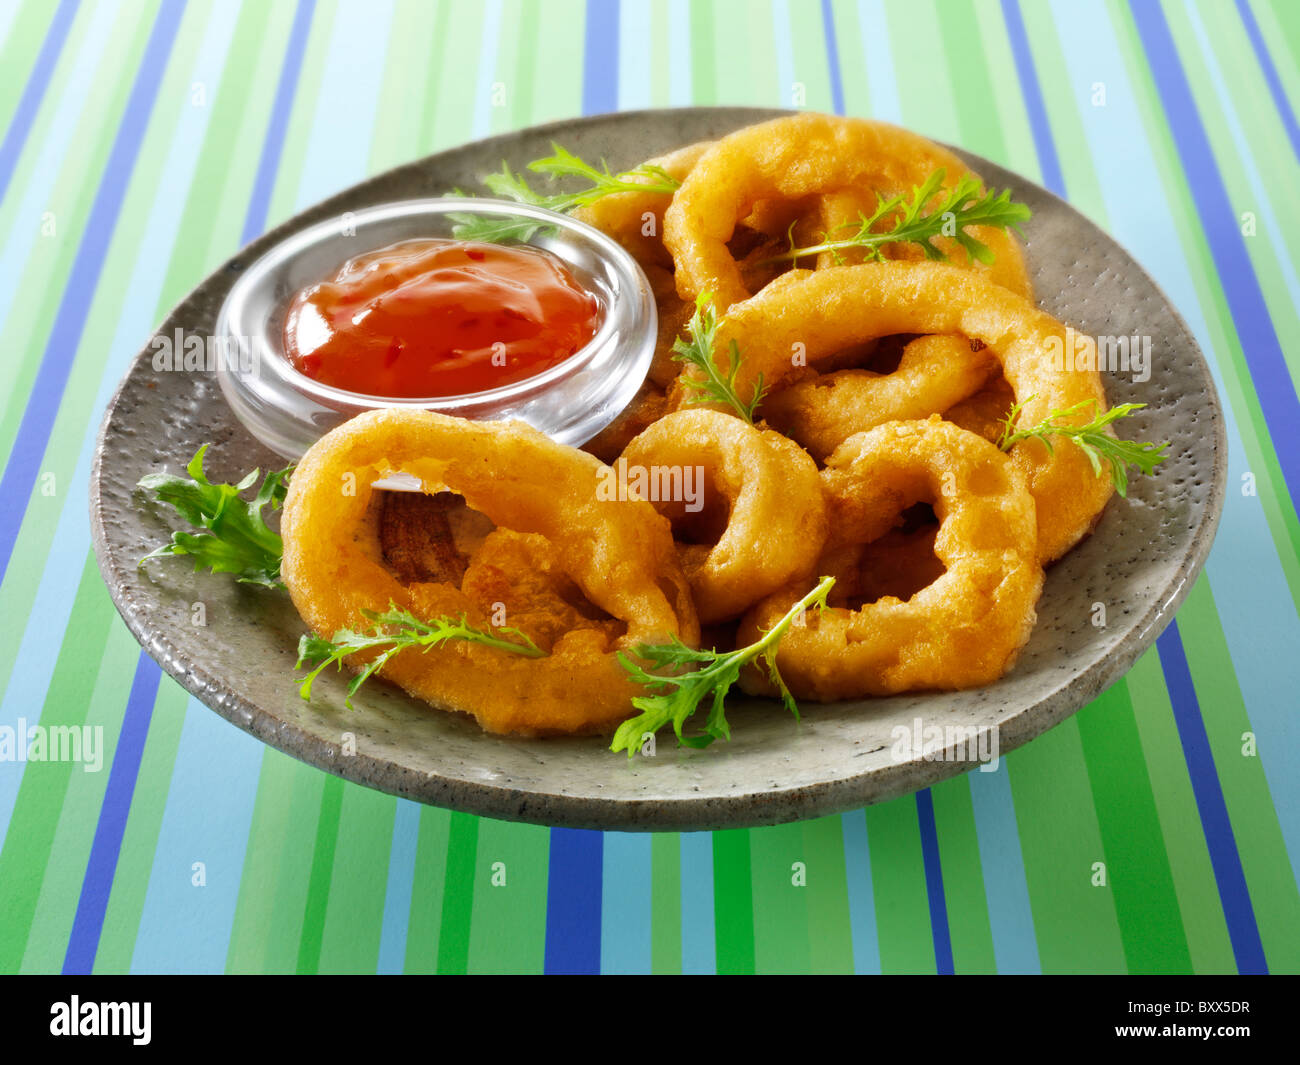 Deep Fried battered onion rings with a chilli sauce & salad Stock Photo